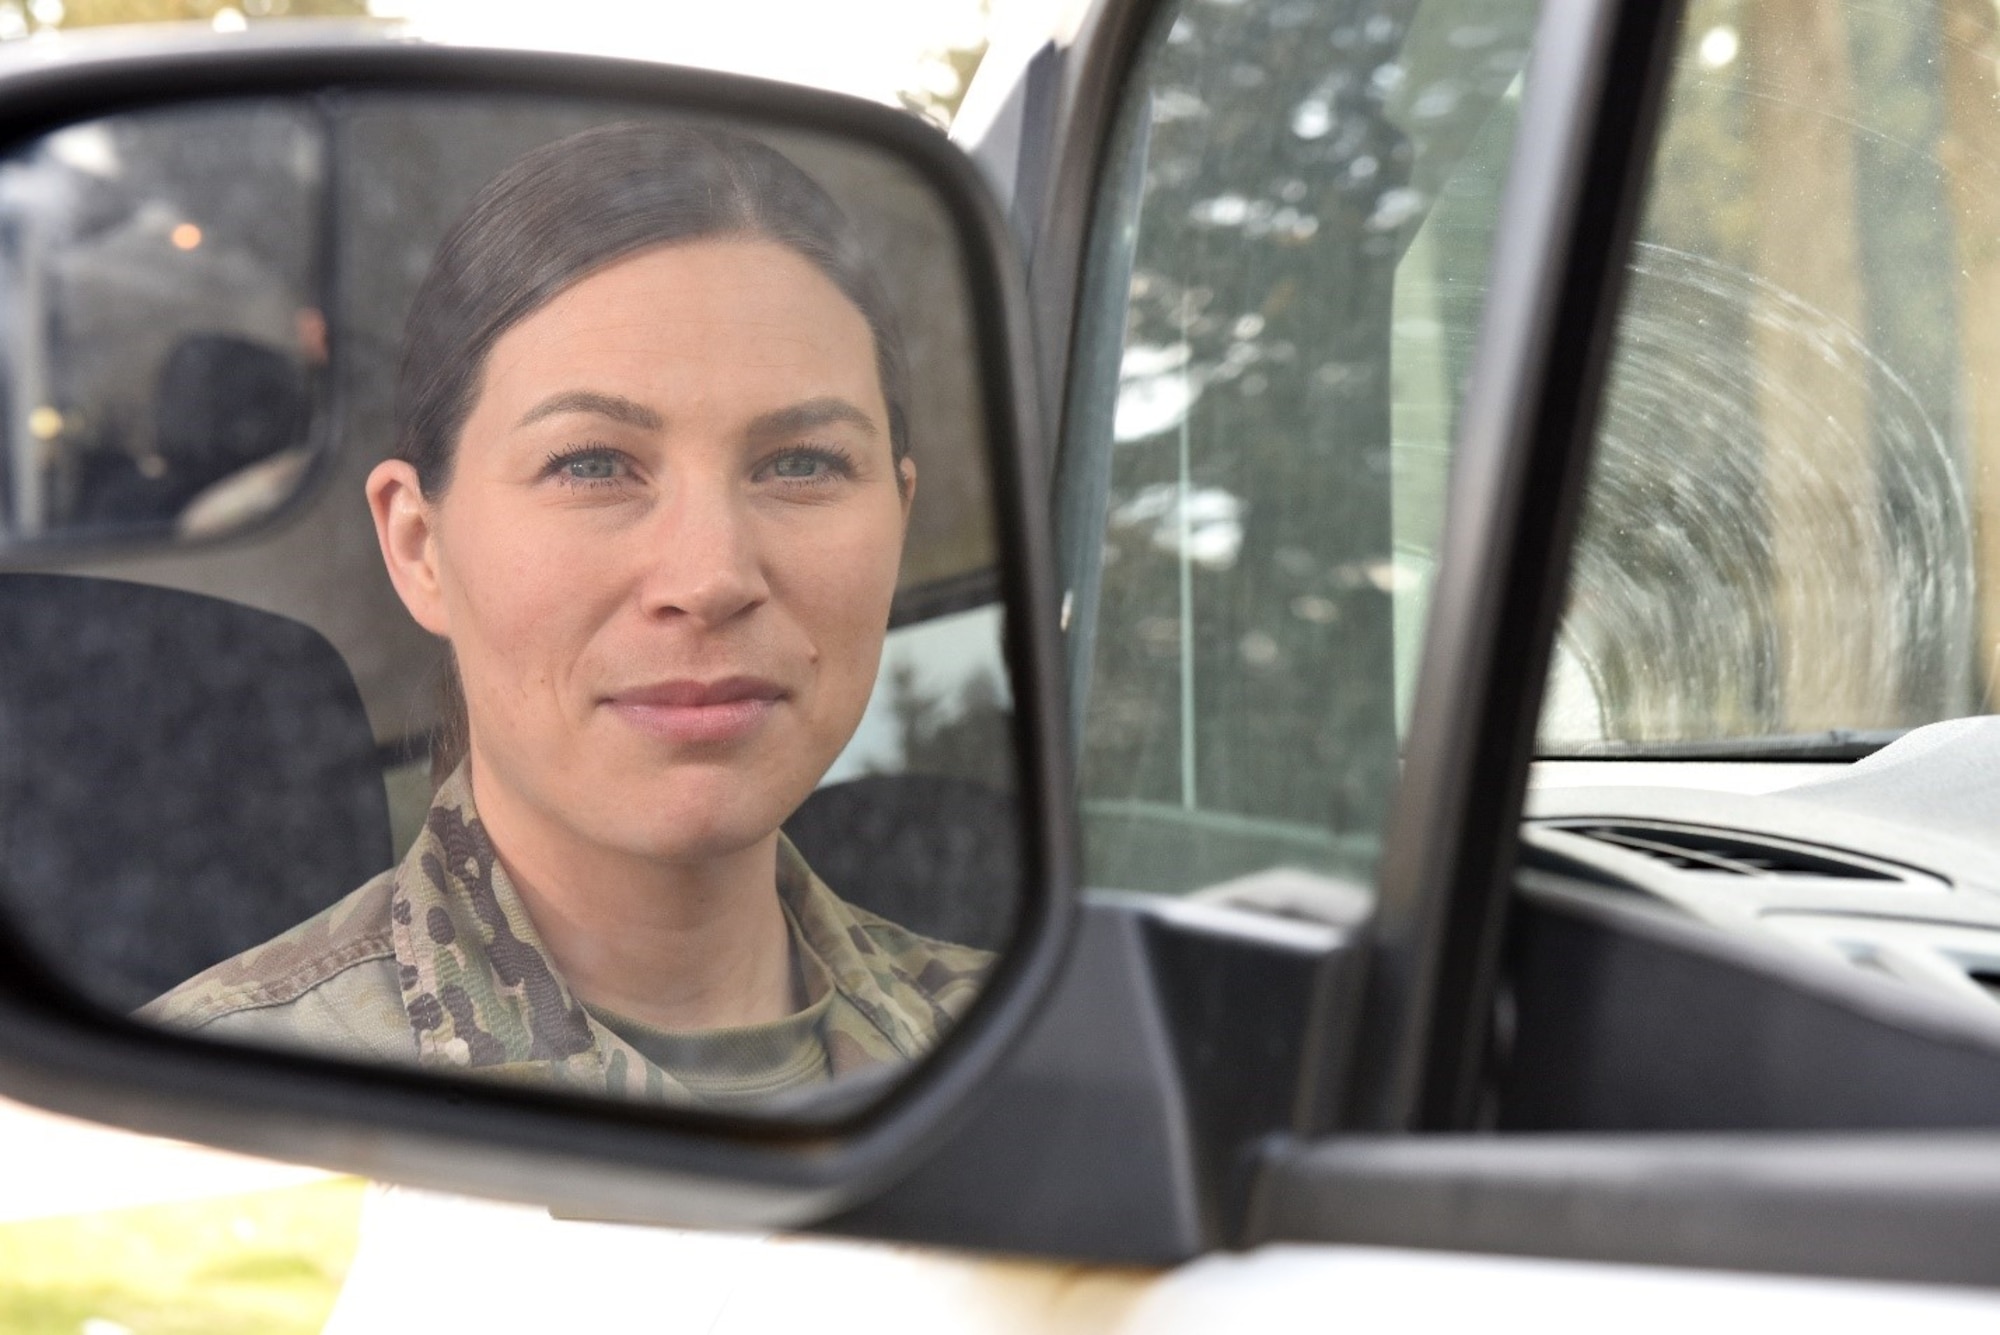 Tech Sgt. Rosemary Gudex, American Forces Network Incirlik operations manager, looks back in her car’s side-view mirror at Incirlik Air Base, Turkey, March 23, 2022. Gudex spent years healing from her experience growing up with an alcoholic father. She now focuses her time and energy on things that hold value to her, like fitness and developing Airmen. (U.S. Air Force photo by Tech. Sgt. Crystal L. Charriere)